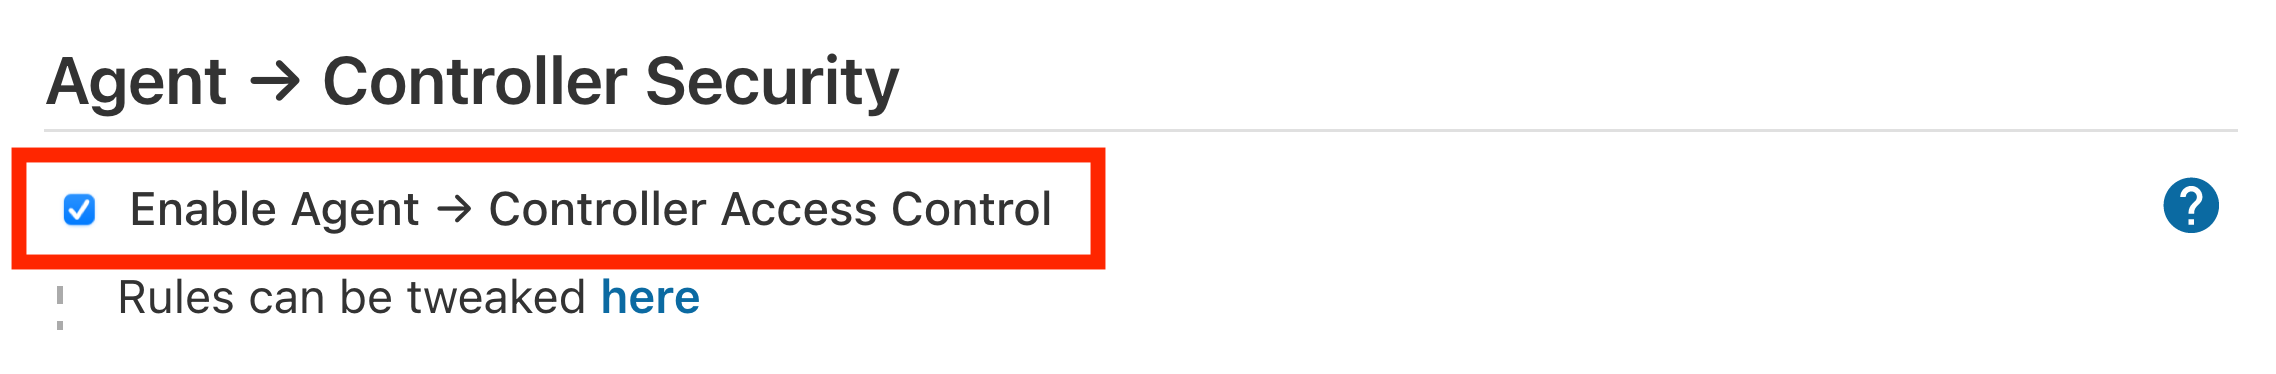 Configure Global Security - Enable Agent ⇒ Controller Access Control